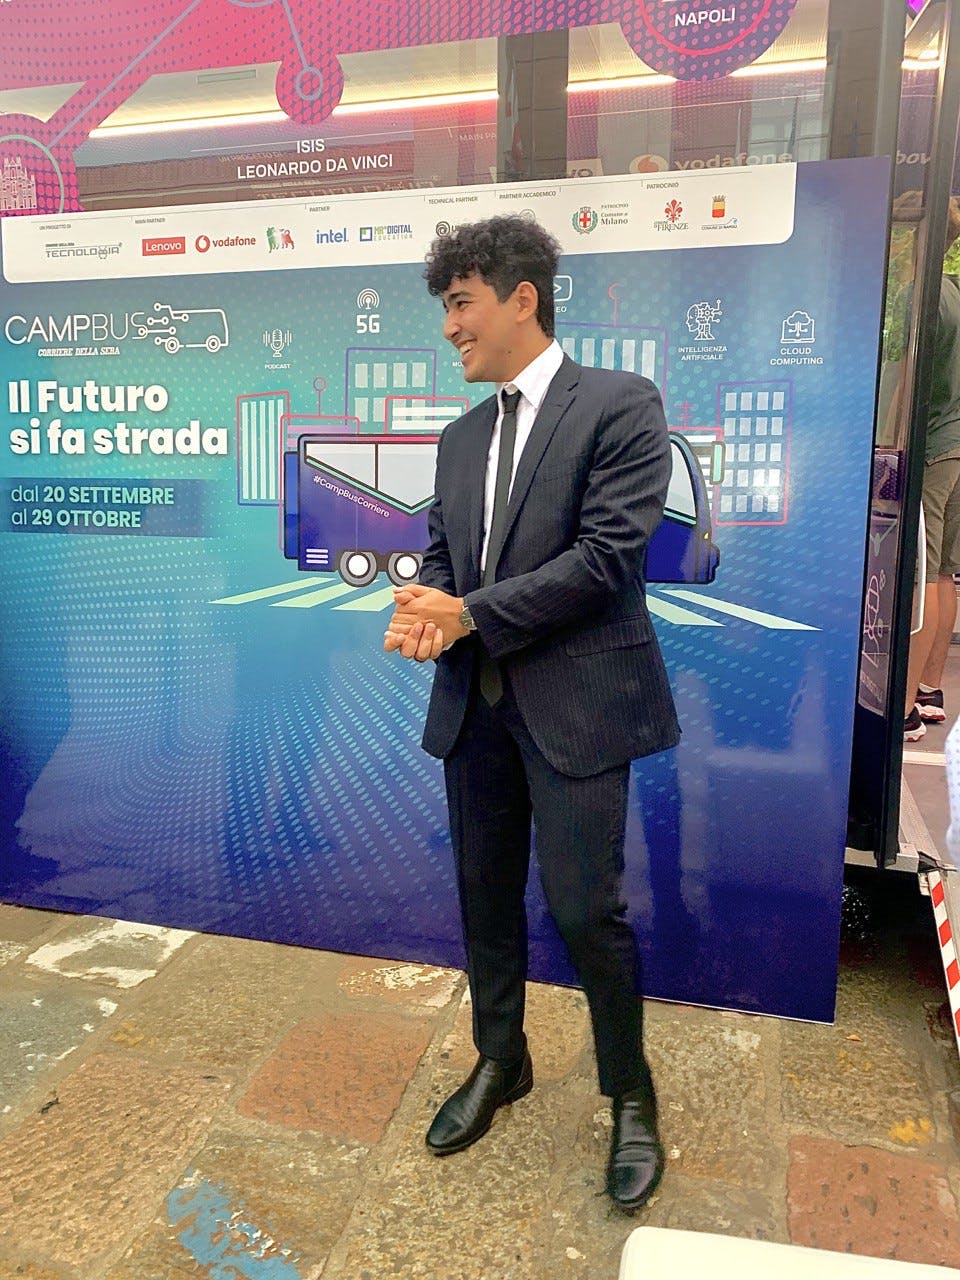 A man in a suit and tie standing in front of a sign that says it's future goes on